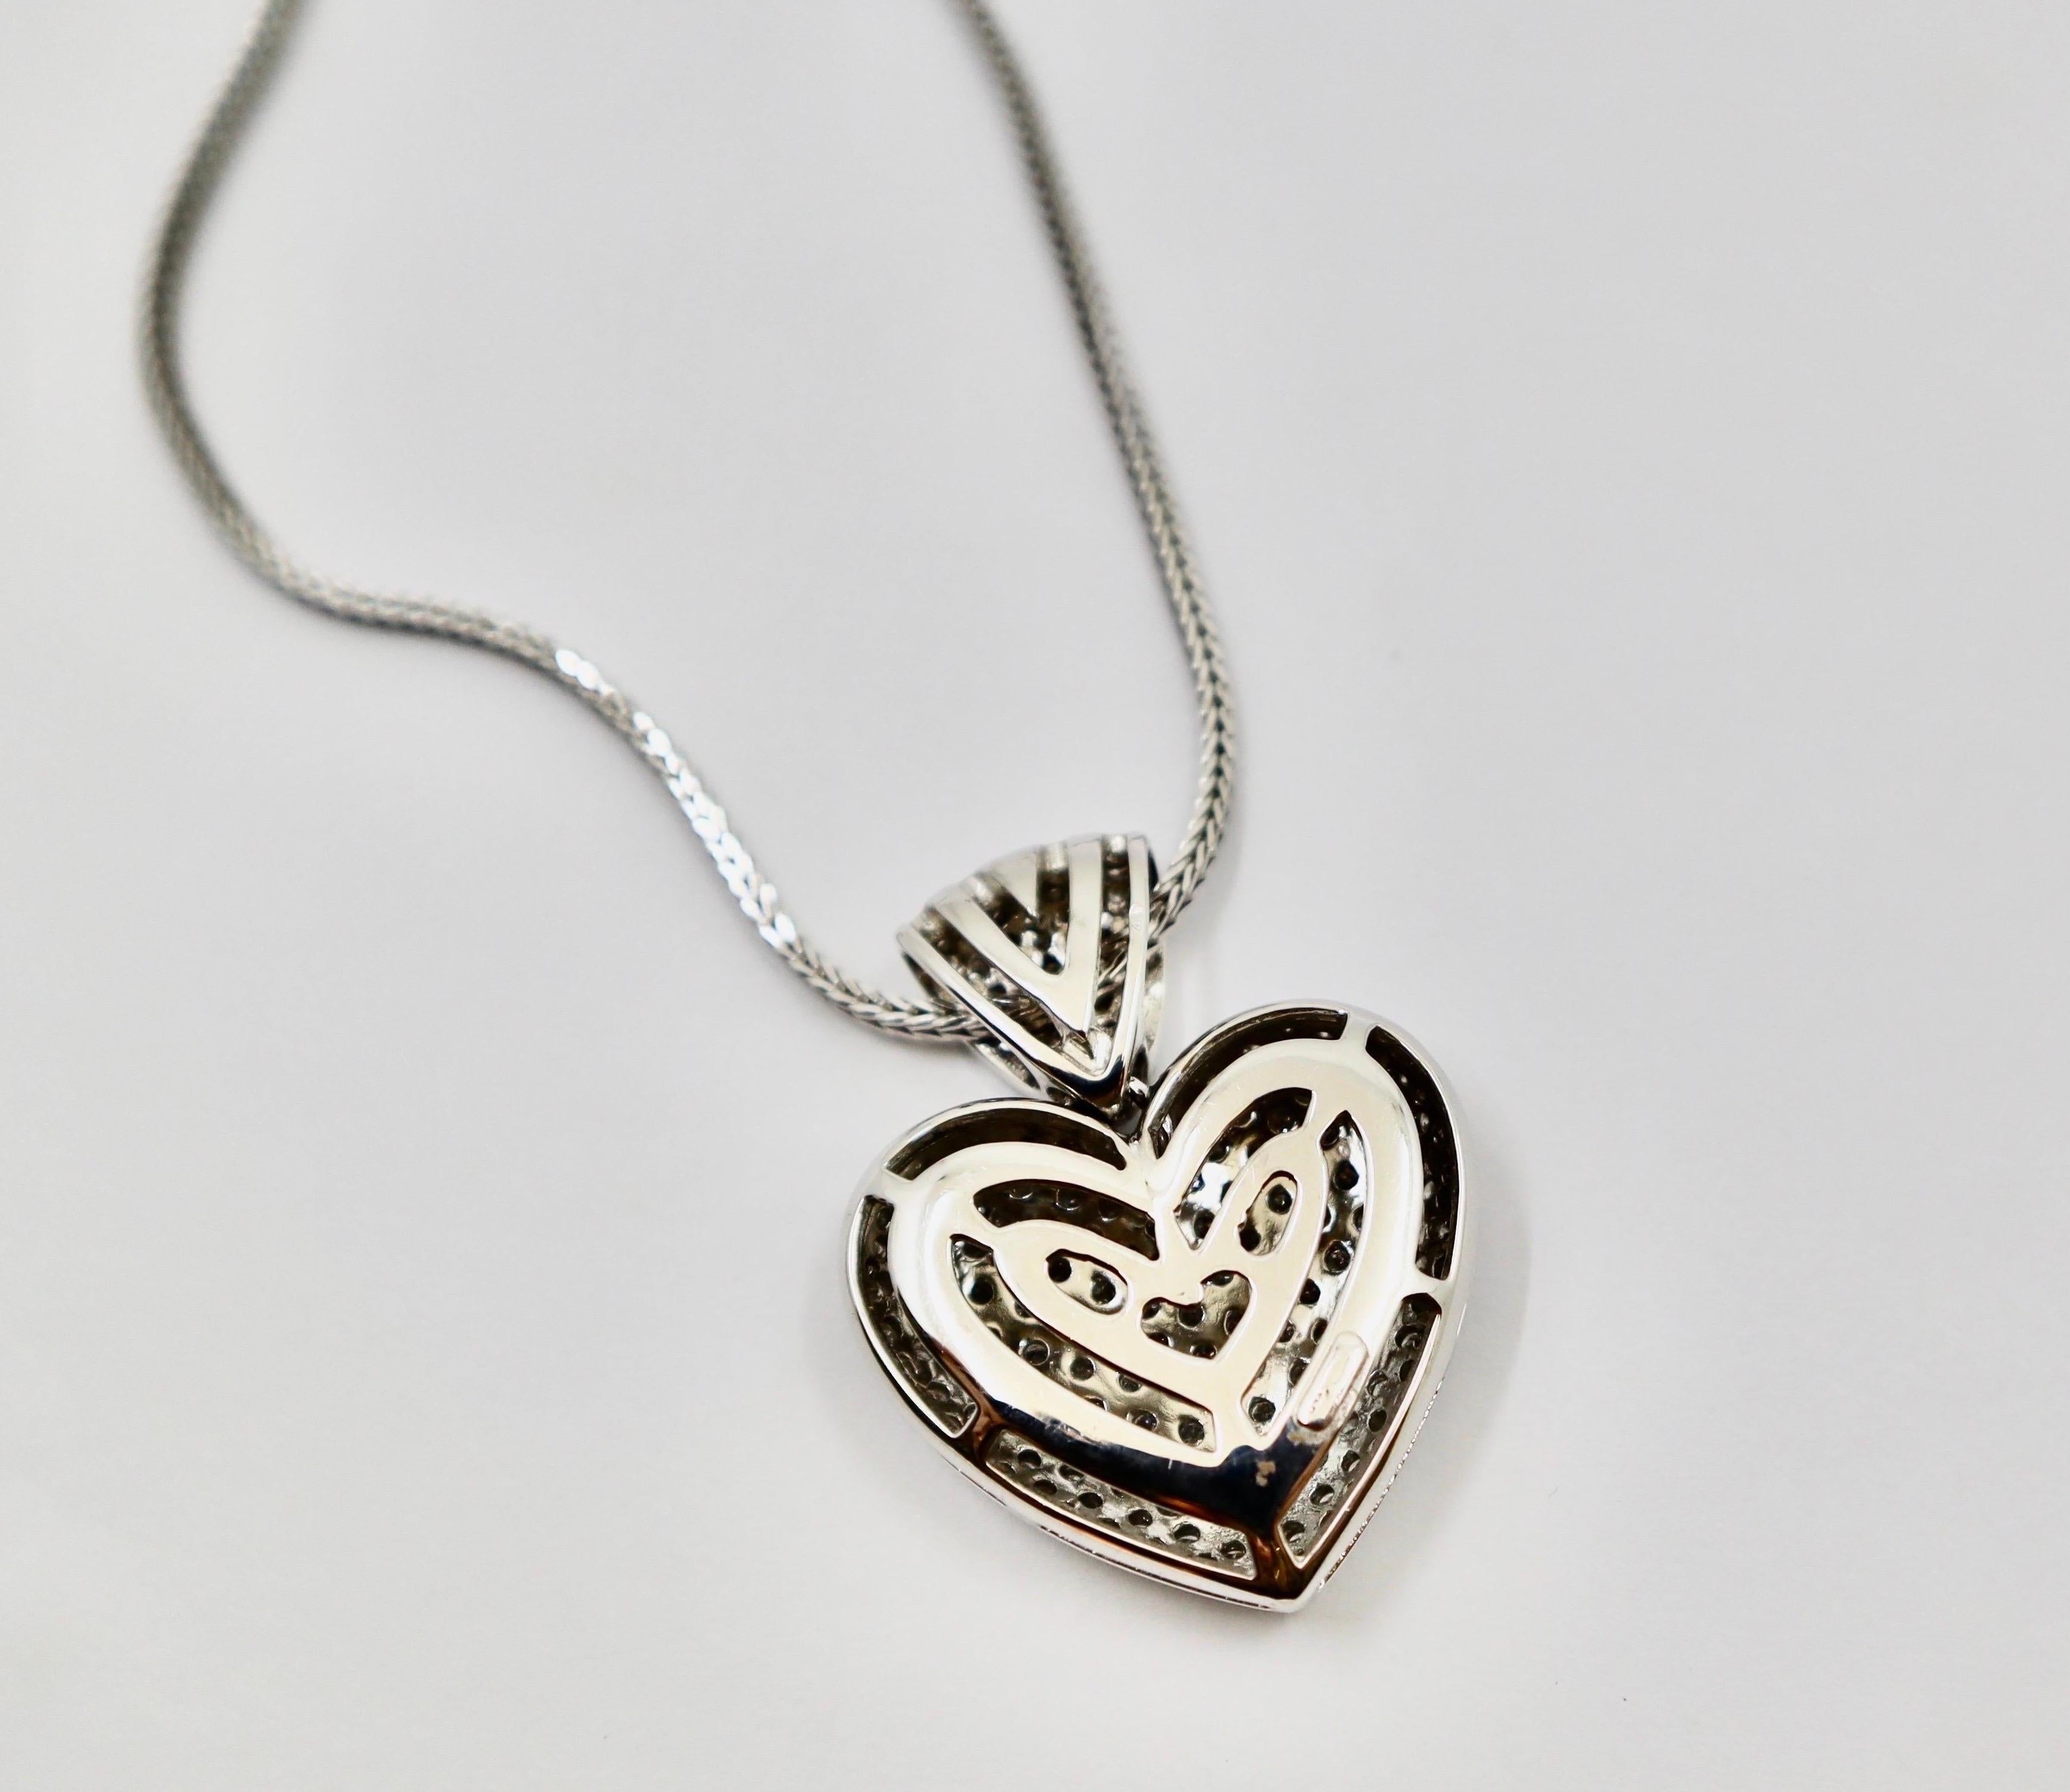 Heart Necklace in diamonds (Approx. 7 carats) and white Gold For Sale 2